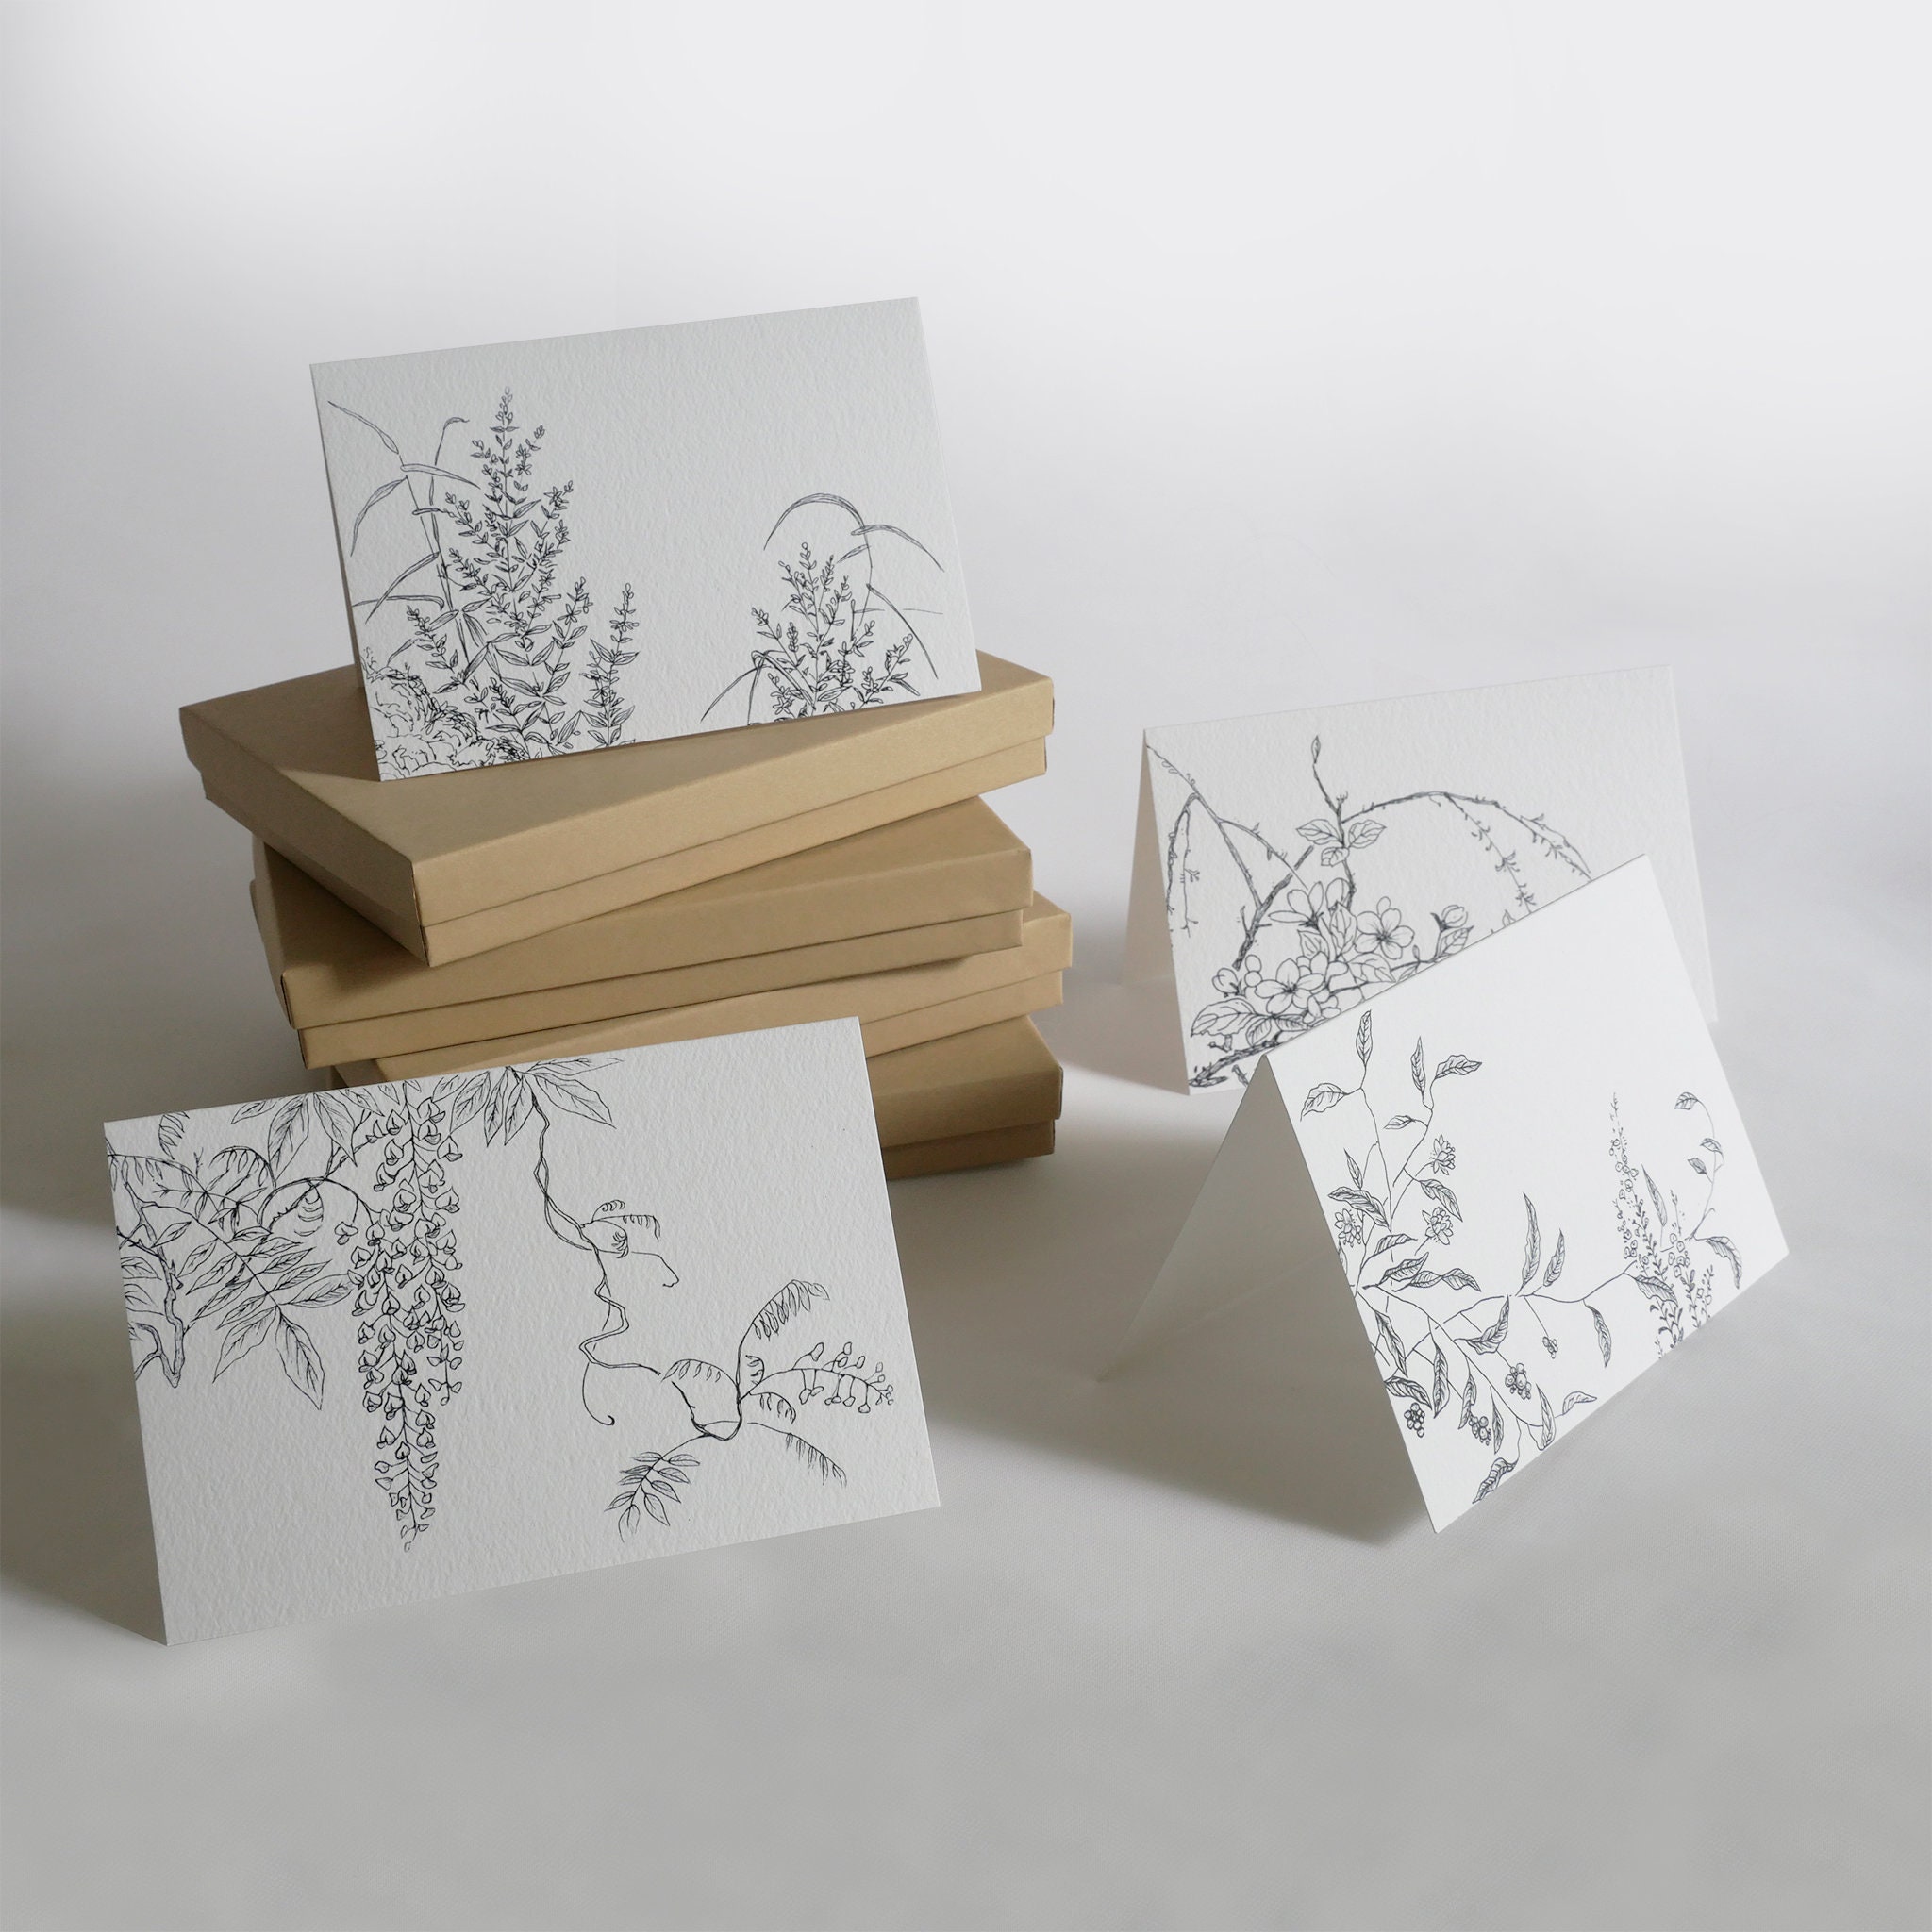 White Blank Note Cards With Envelope / Size A2 / Blank Card and Envelopes /  4.25 X 5.5 / Set of 25 / Paper Made With Renewable Energy 